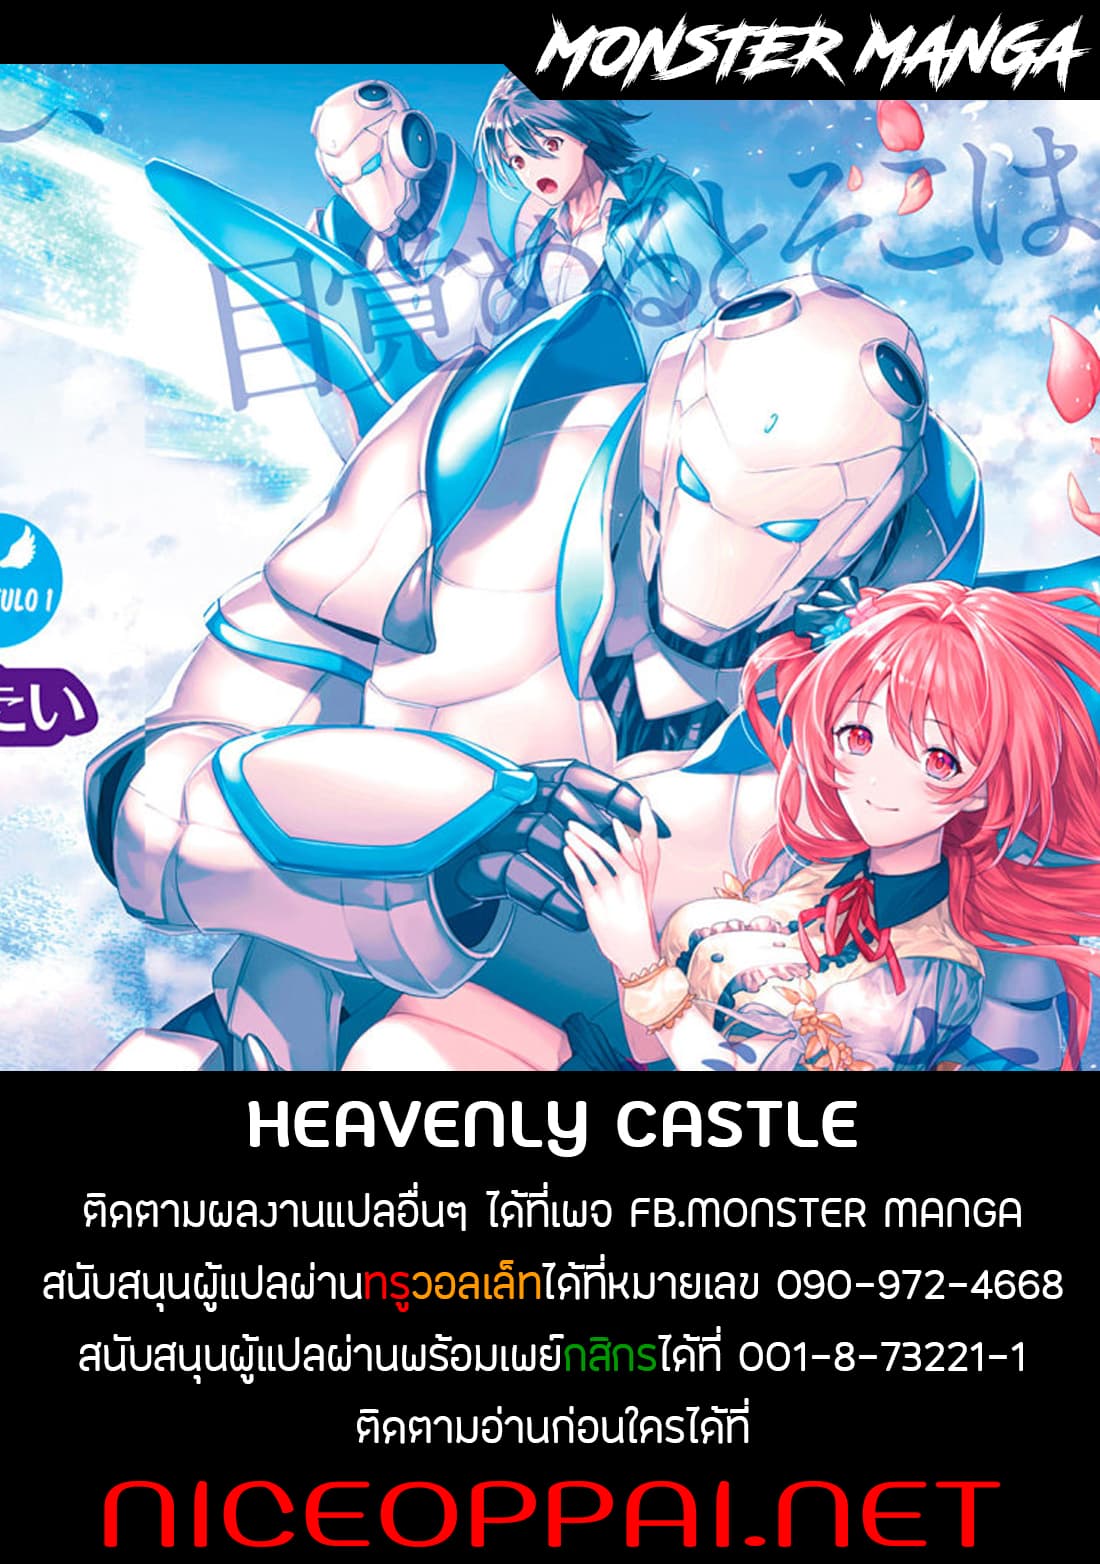 I Want To Play Happily In Another World Because I Got A Heavenly Castle5 (30)